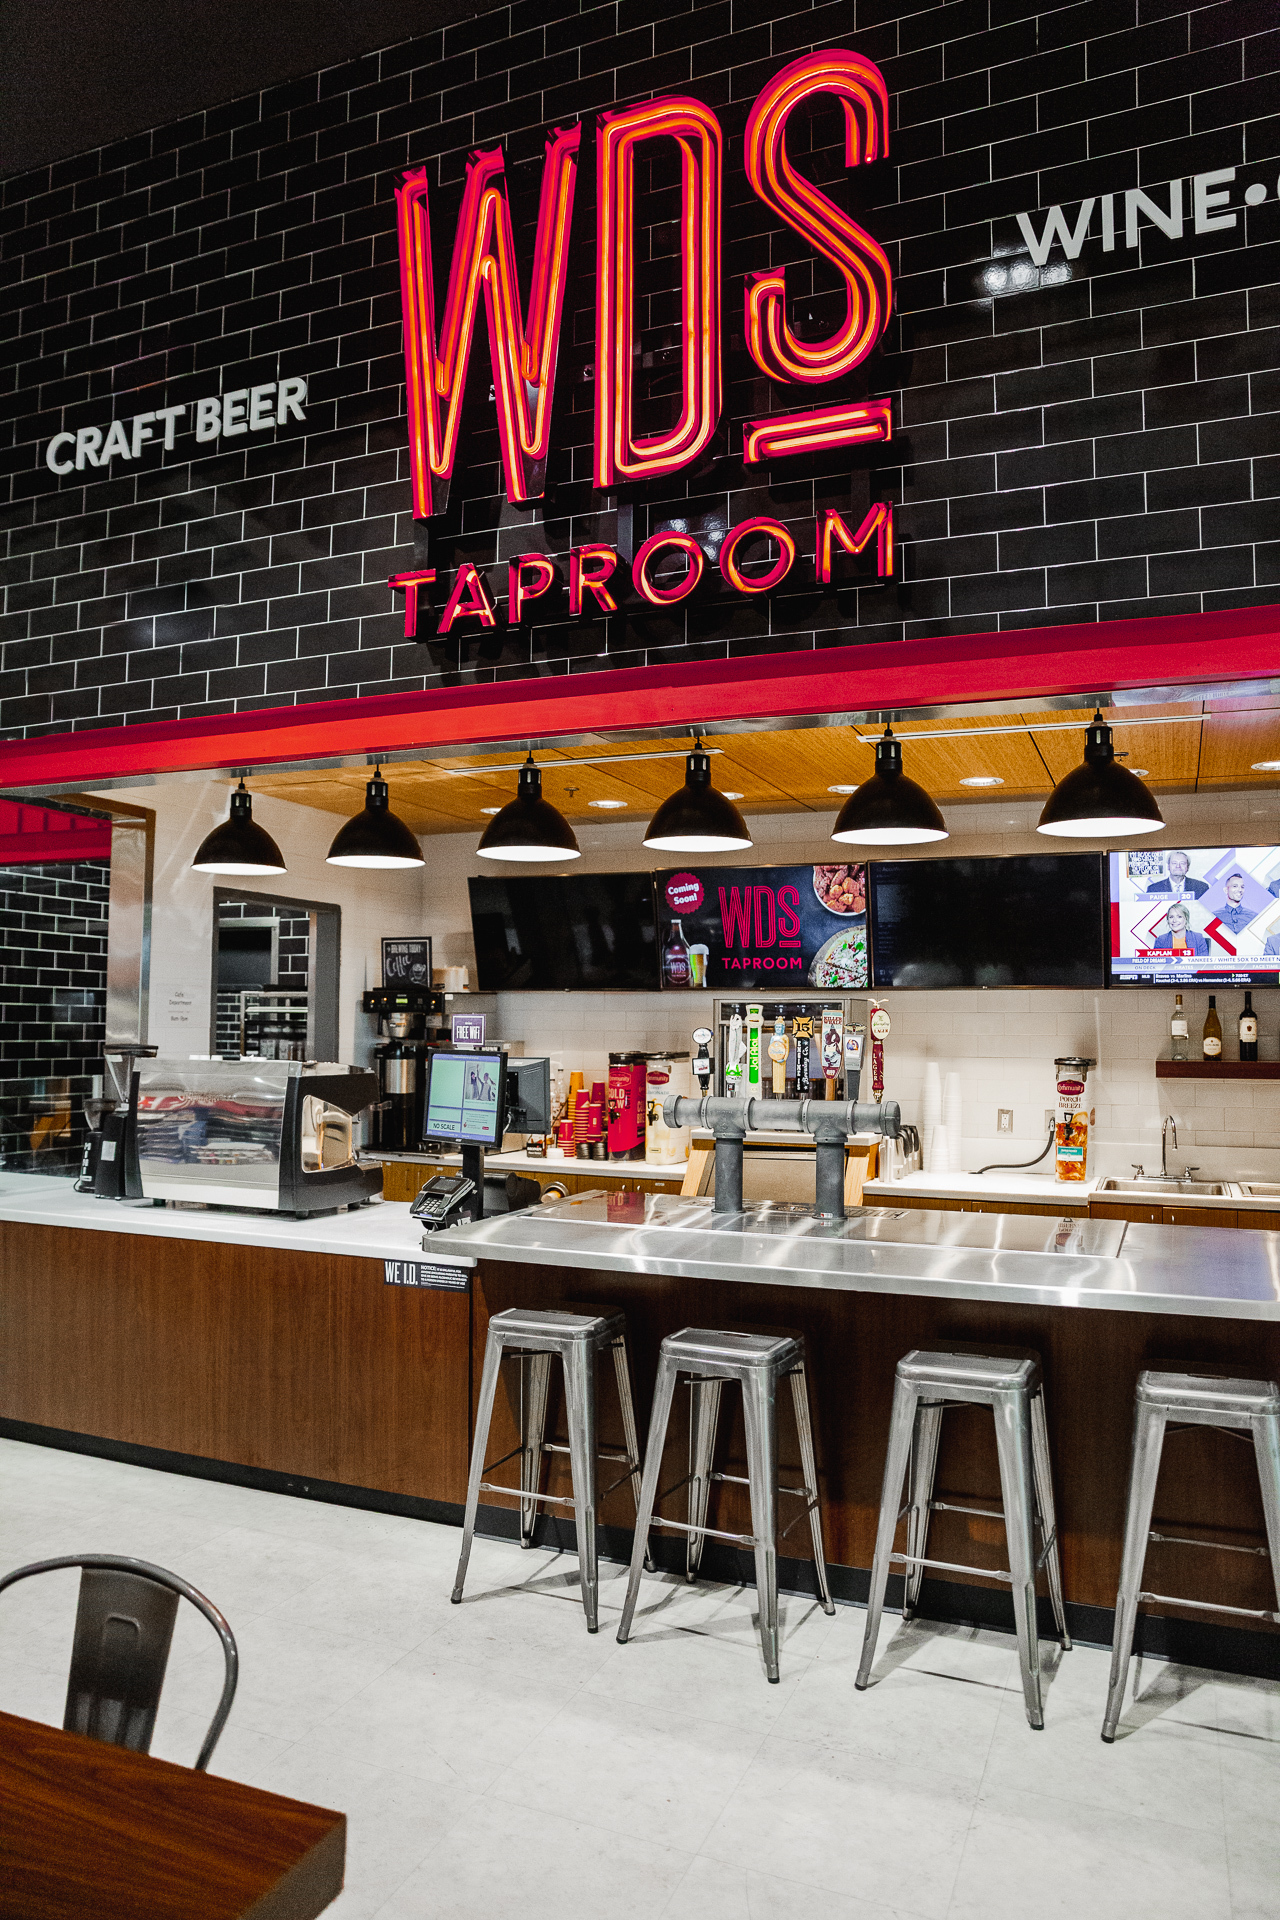 Through Sept. 2, Winn-Dixie will donate $1 to charity partner Folds of Honor for each taproom beverage bought at the Point Meadows and Neptune Beach WD.